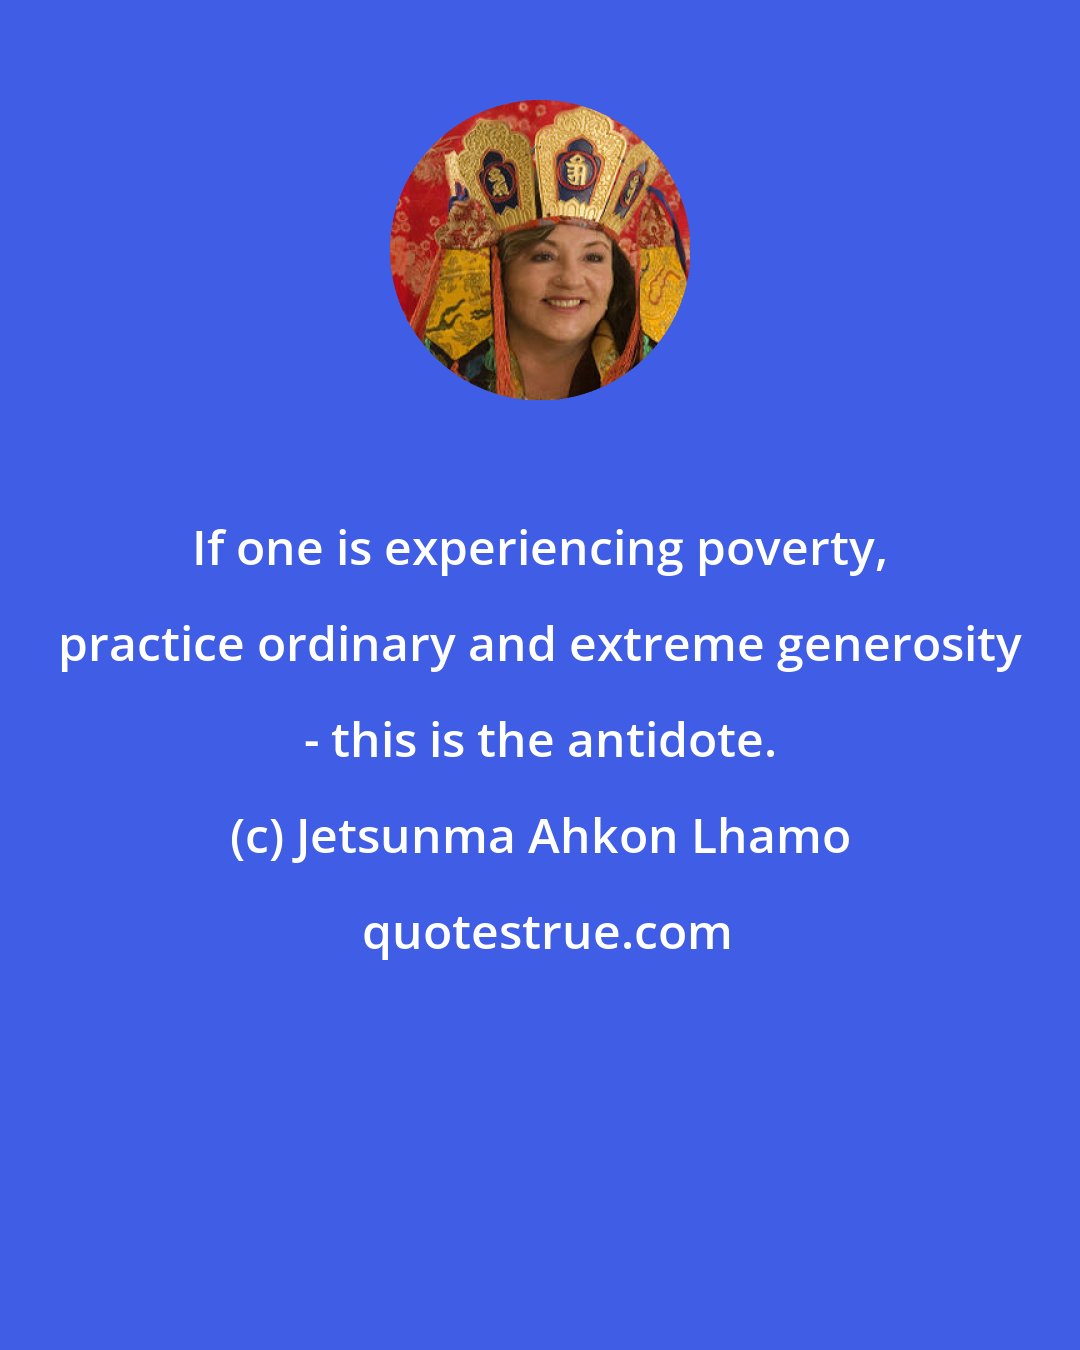 Jetsunma Ahkon Lhamo: If one is experiencing poverty, practice ordinary and extreme generosity - this is the antidote.